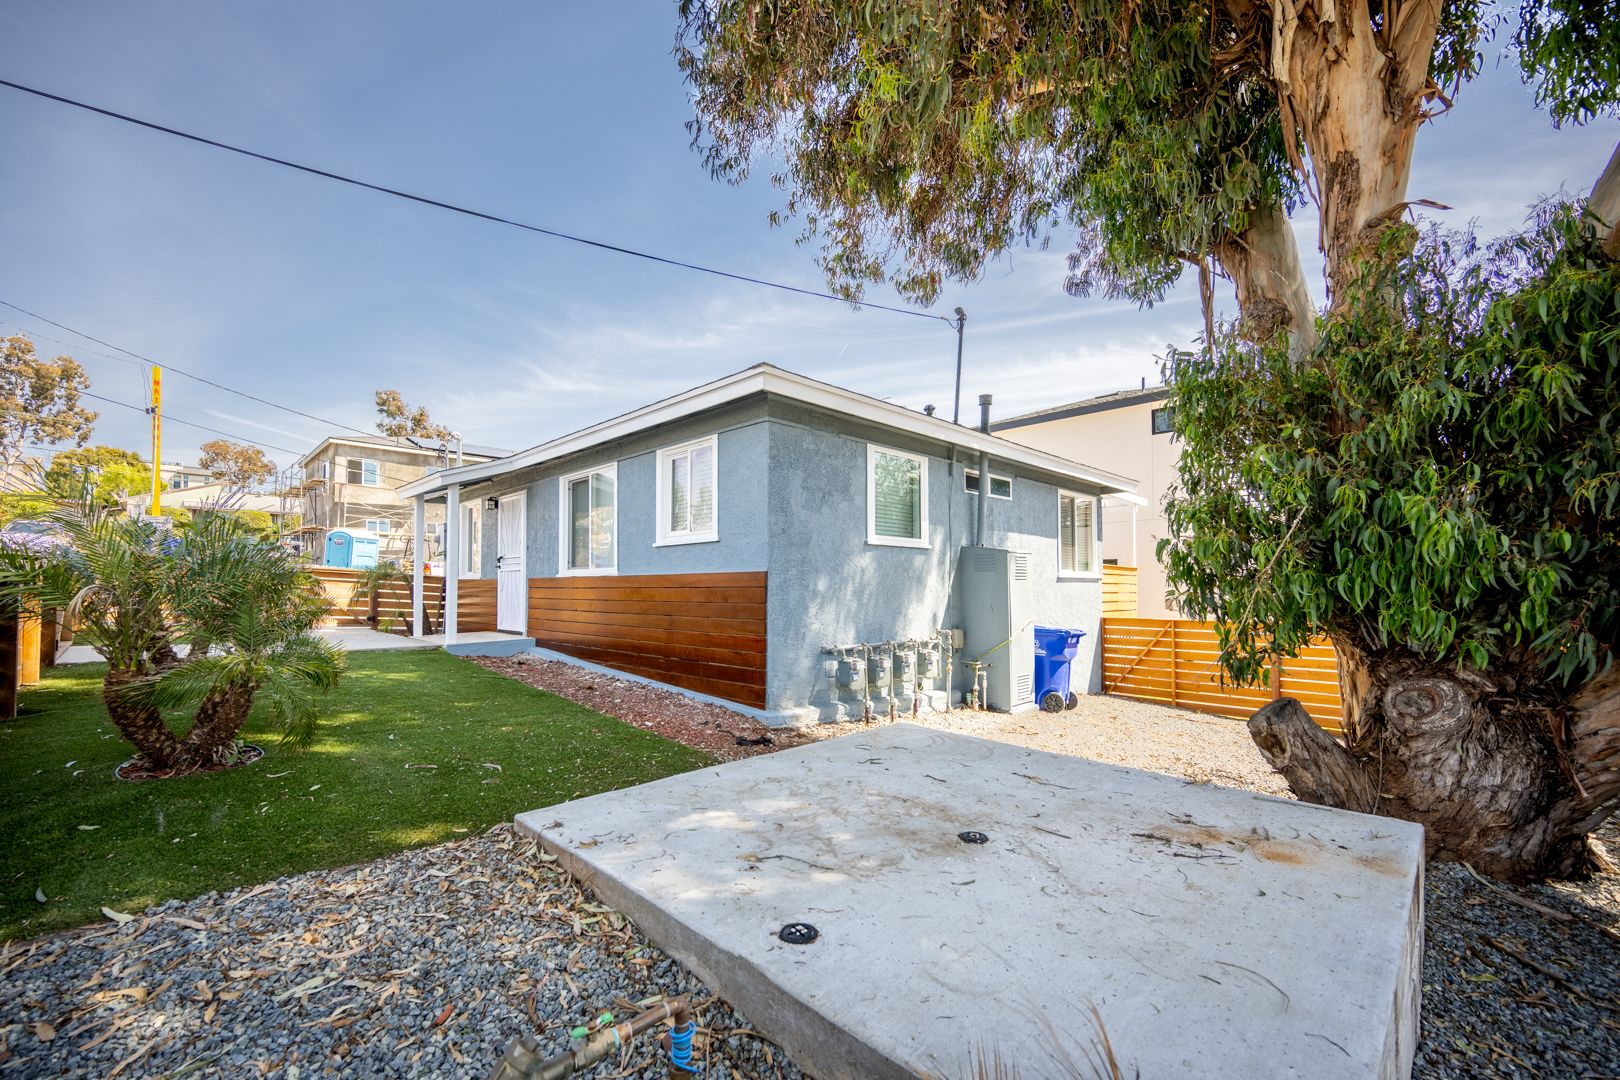 Spacious 2 Bed 1 Bath House in Linda Vista with Awesome Deck & Yard Area!